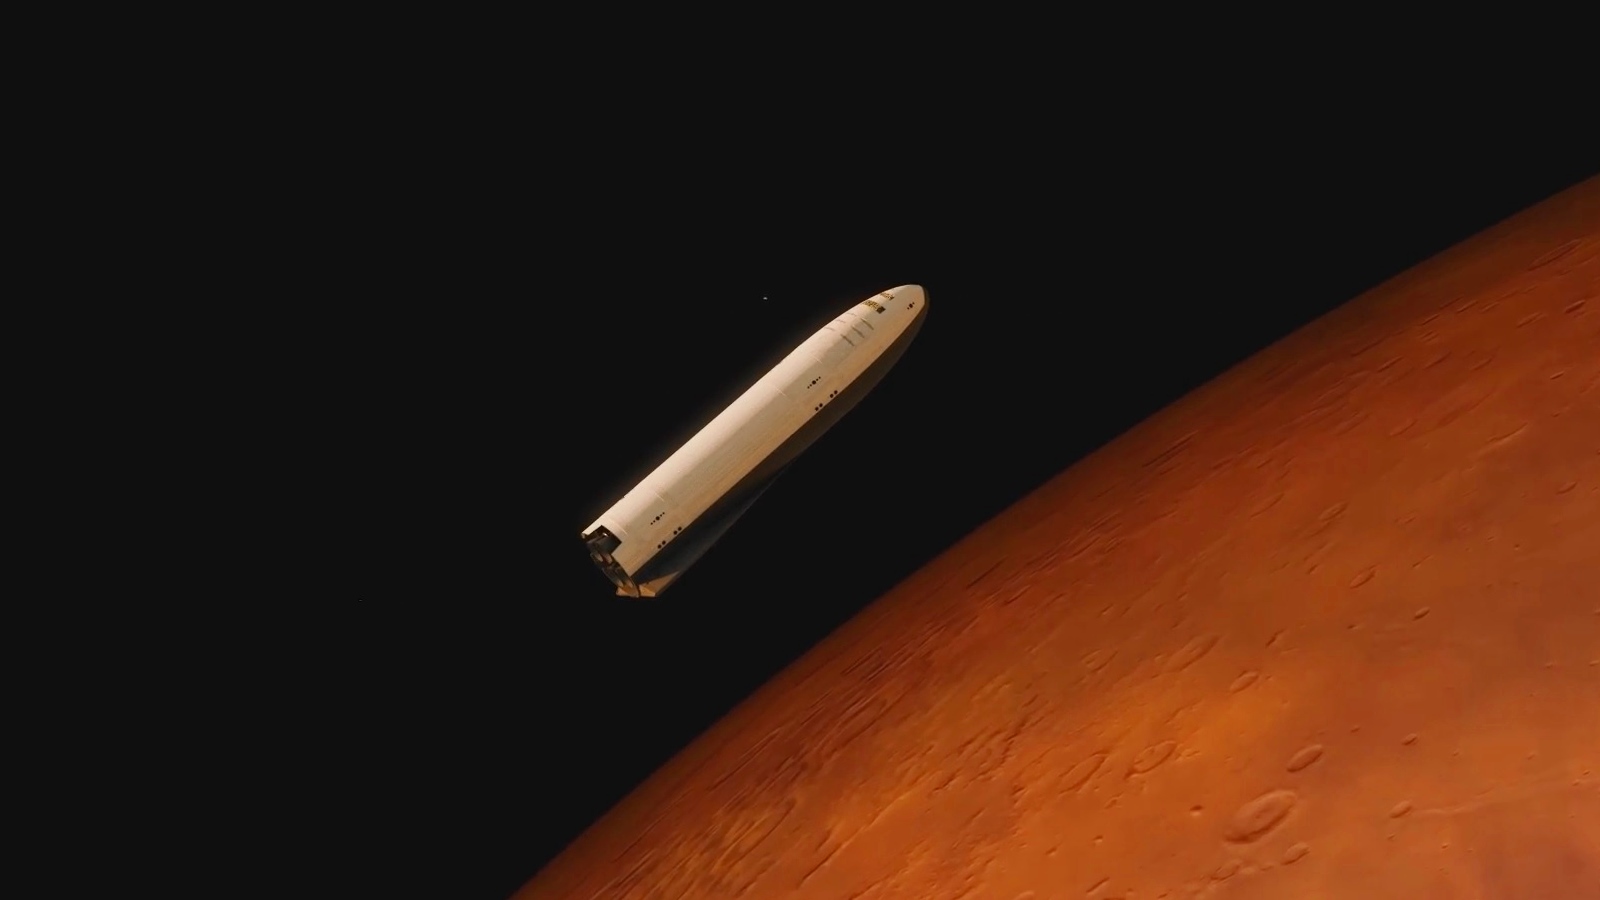 SpaceX BFR spaceship (BFS) approaching Mars